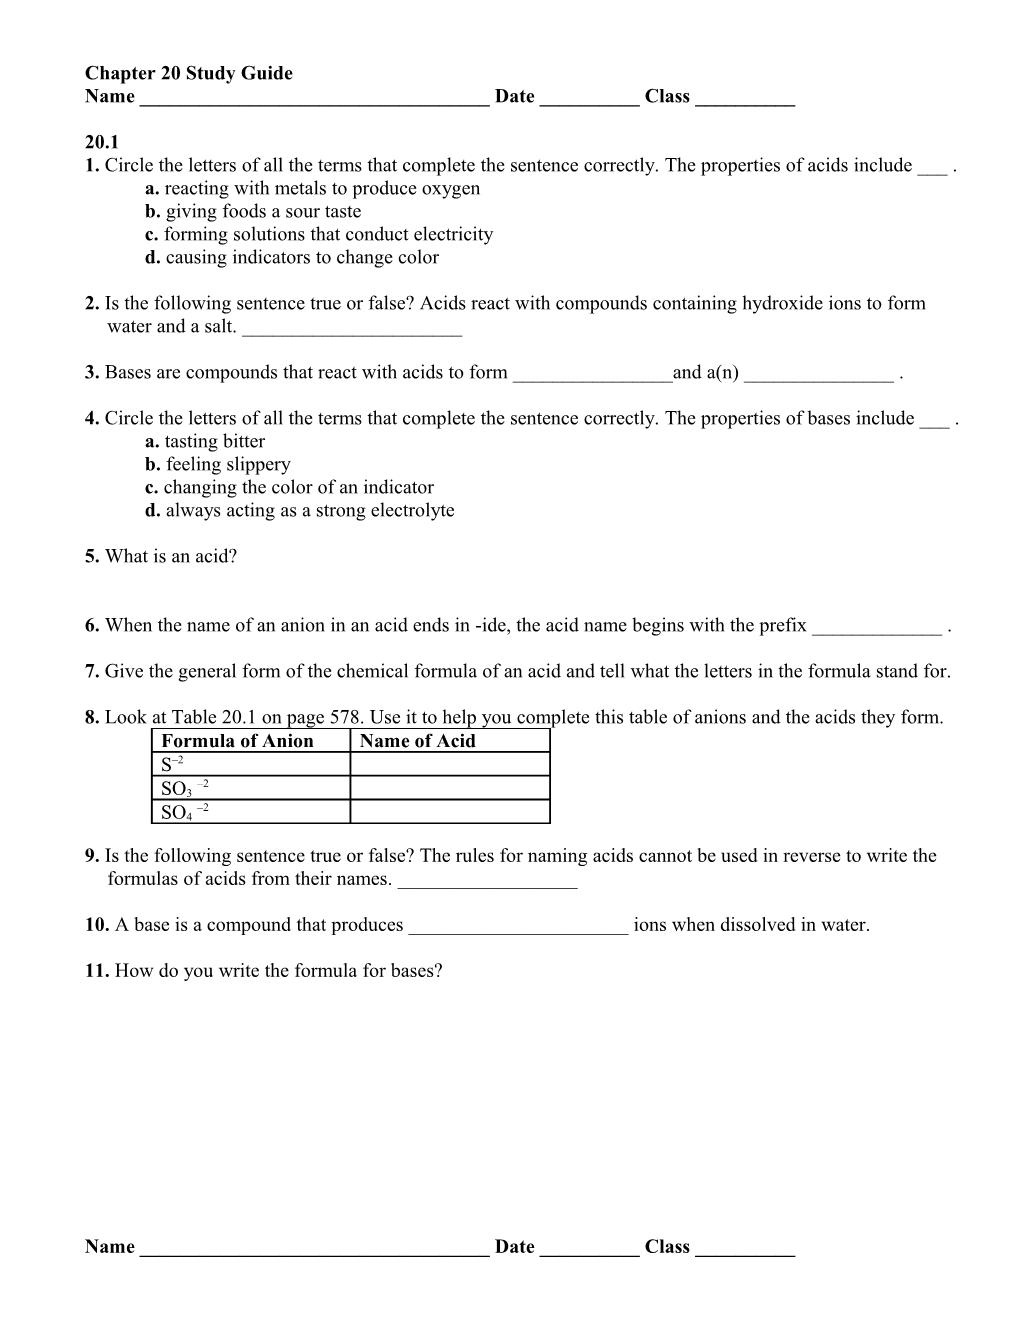 Chapter 20 Study Guide